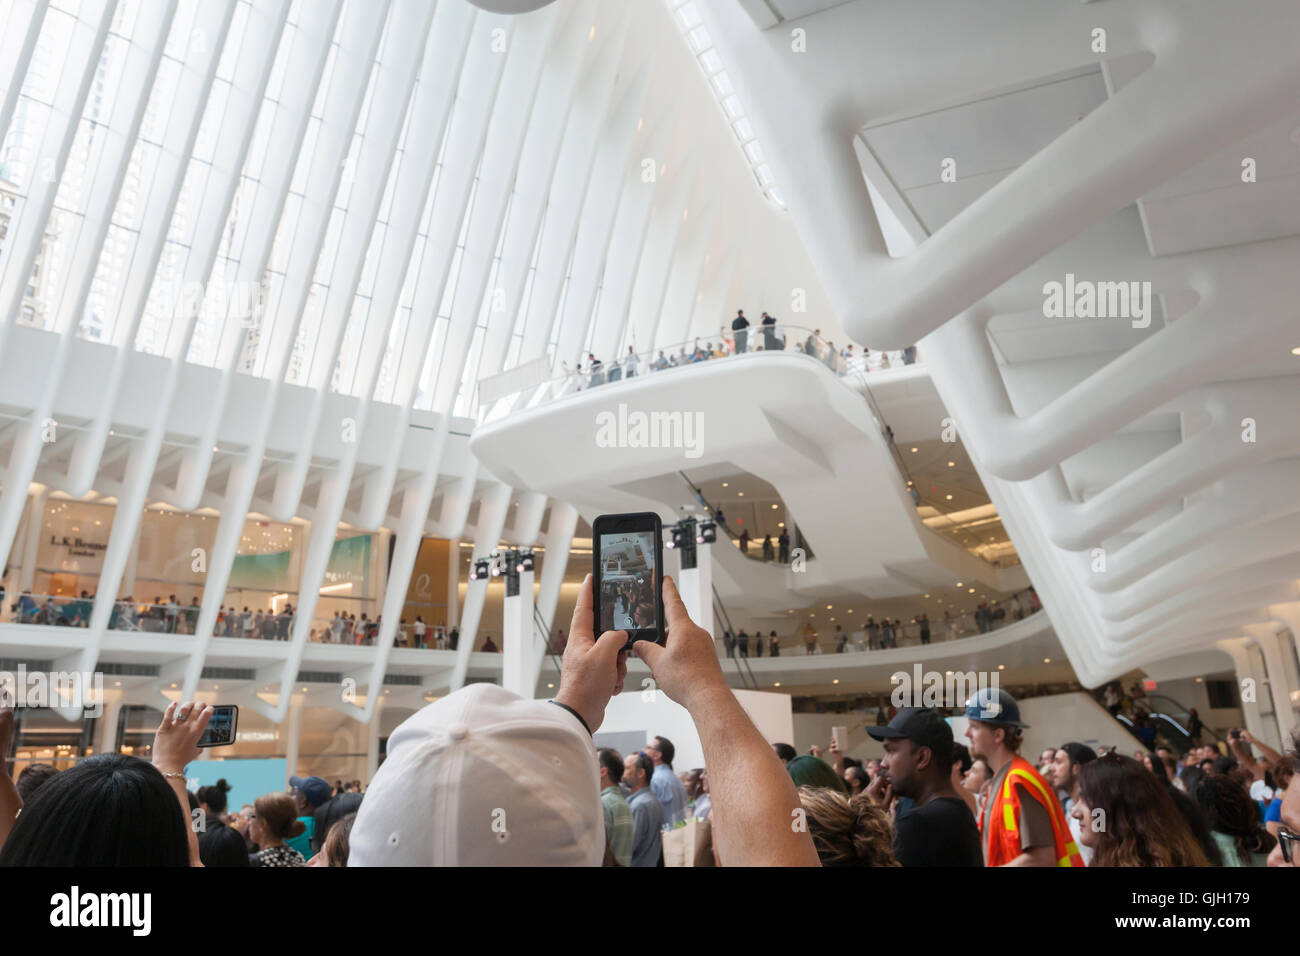 Thousands of visitors pack the World Trade Center Transportation Hub, known as the Oculus, on Tuesday, August 16, 2016 for the grand opening of the retail spaces. The 350,000 square foot retail space will feature over 100 stores when they all open, including a now opened Apple Store. The mall opens almost 15 years after the World Trade Center terrorist attack.  (© Richard B. Levine) Stock Photo